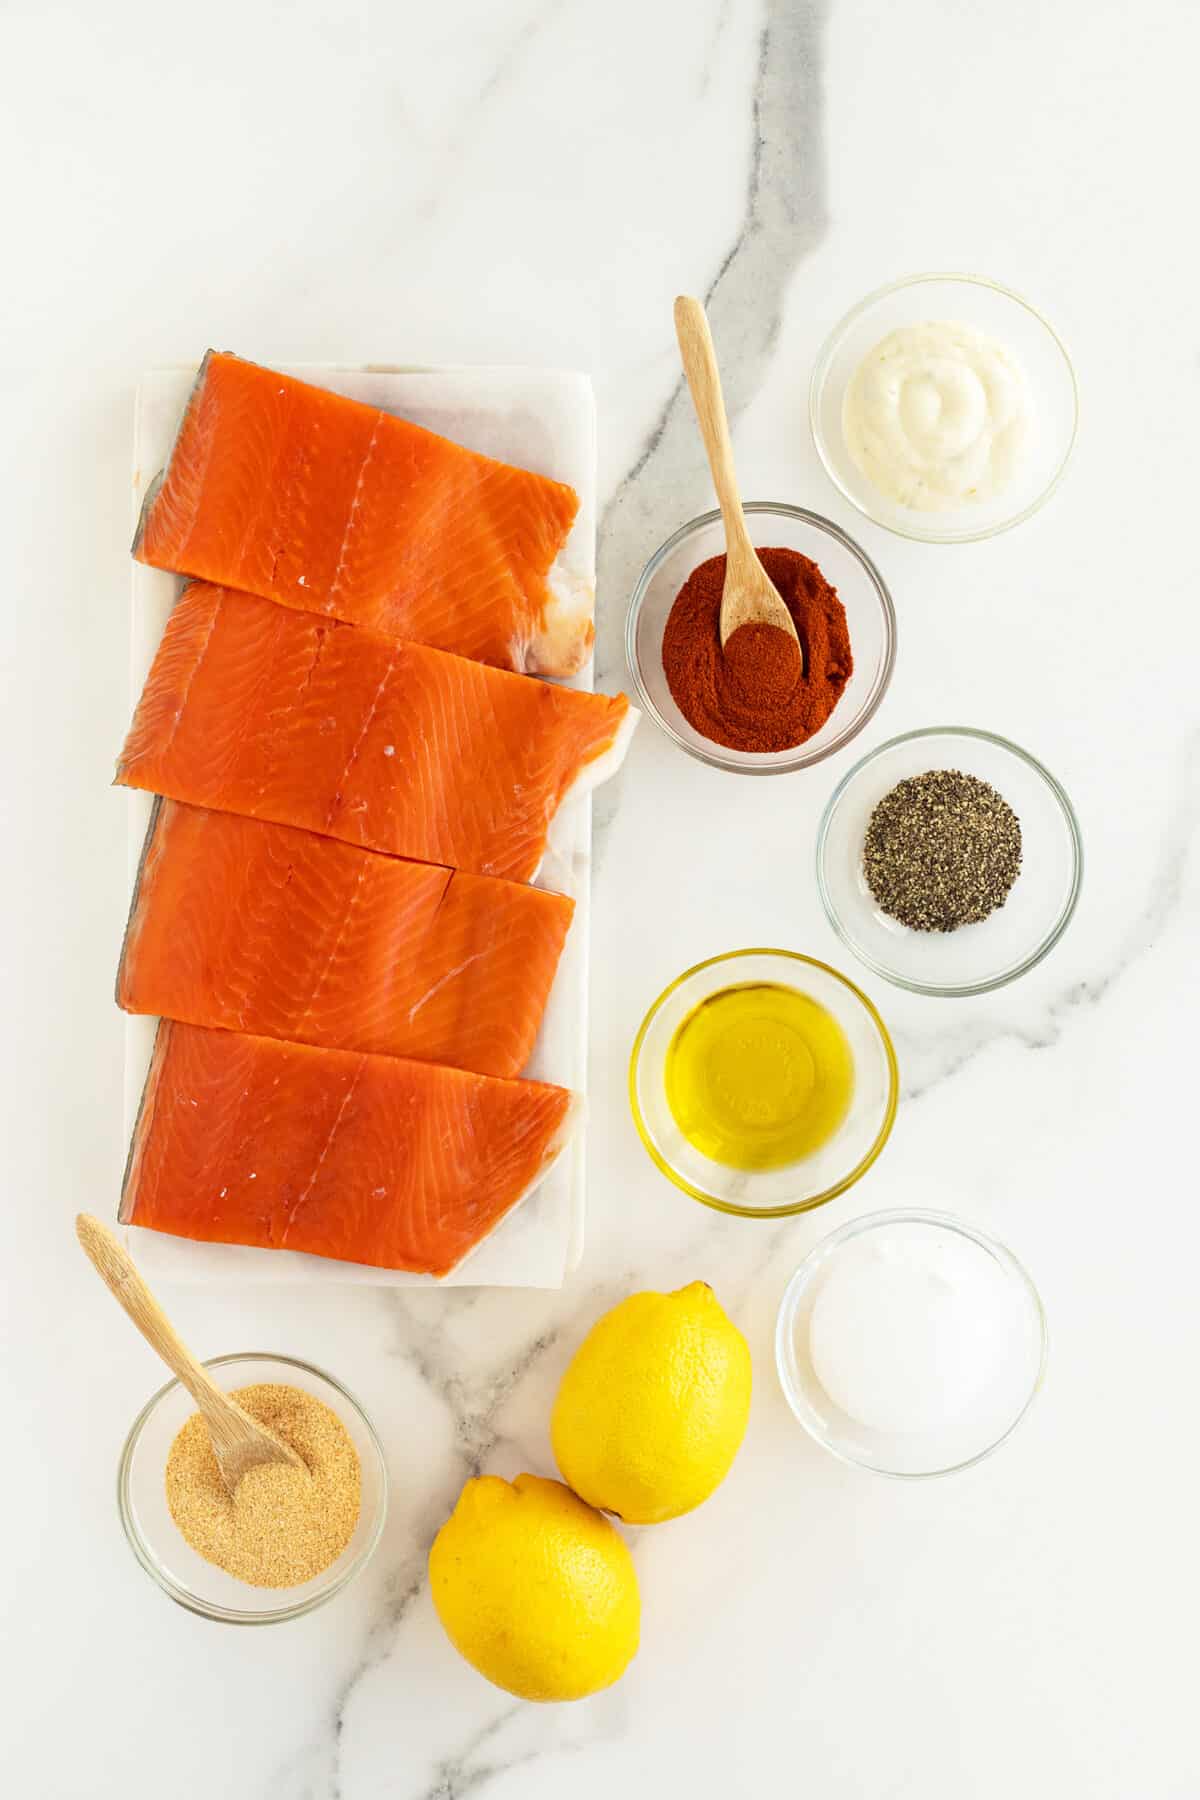 Air fryer salmon ingredients in small clear bowls beside salmon fillets